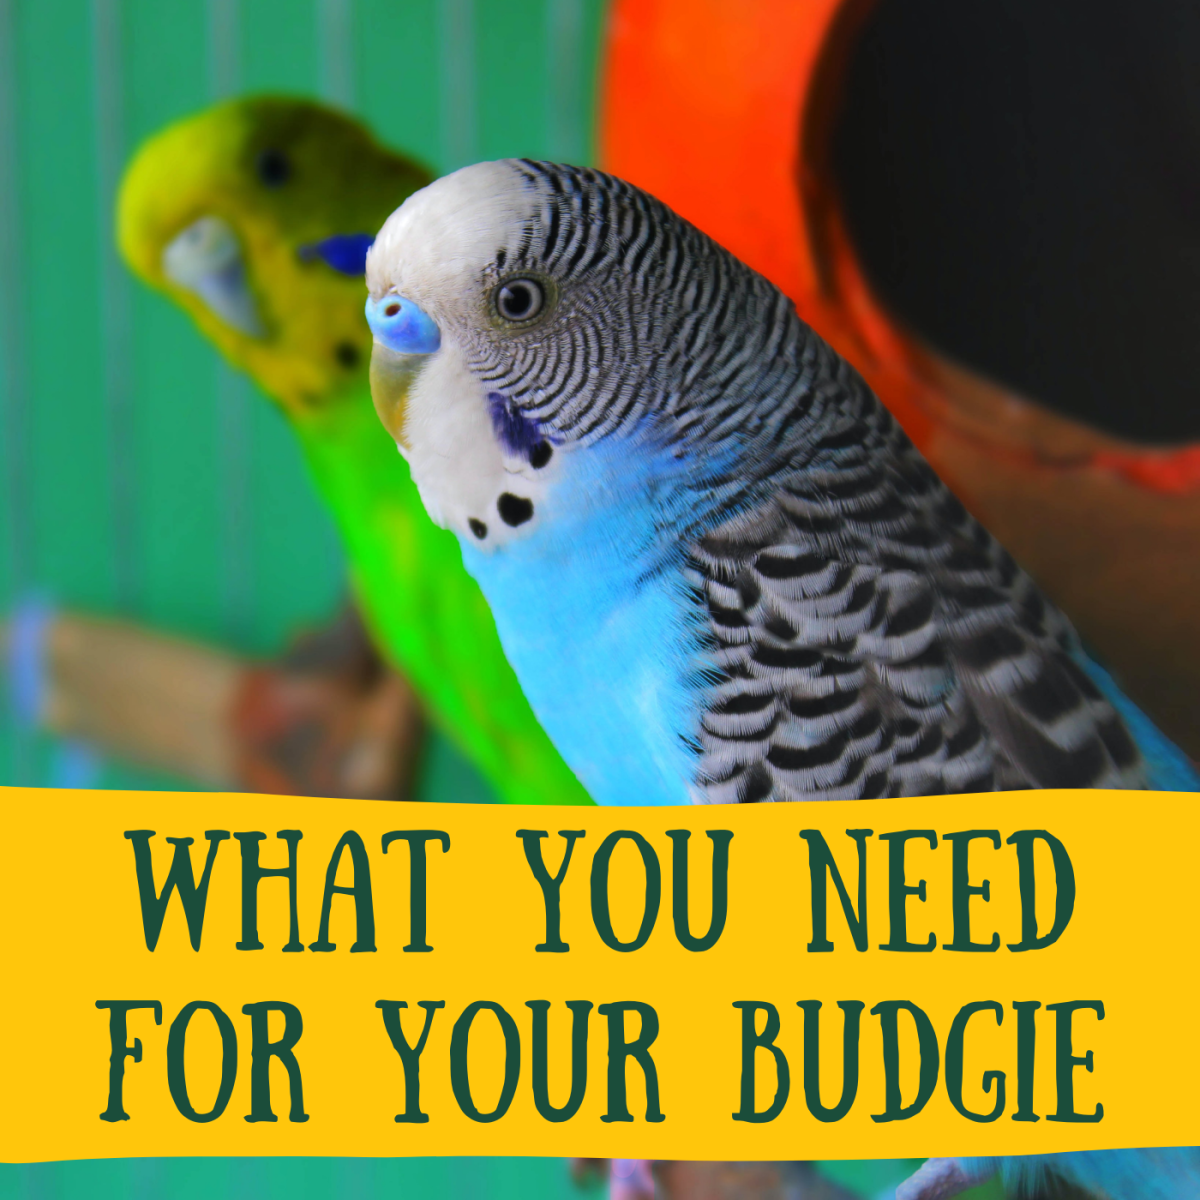 Get a shopping list for your new pet budgie, along with advice on setting up the cage.